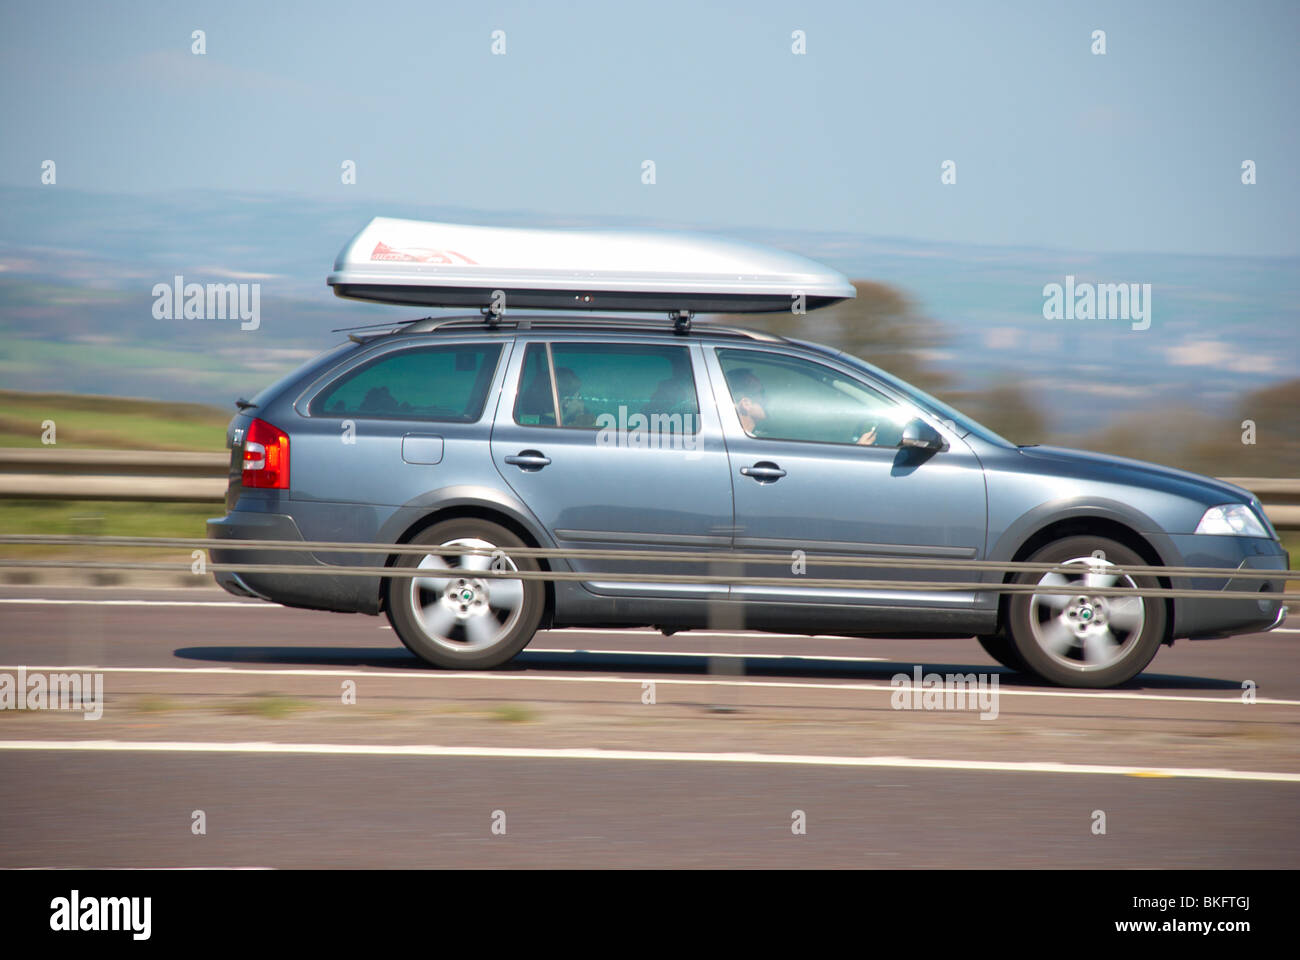 Silver / blue Skoda estate car (with roof boot) on the M62 motorway (near Outlane, Huddersfield). Stock Photo